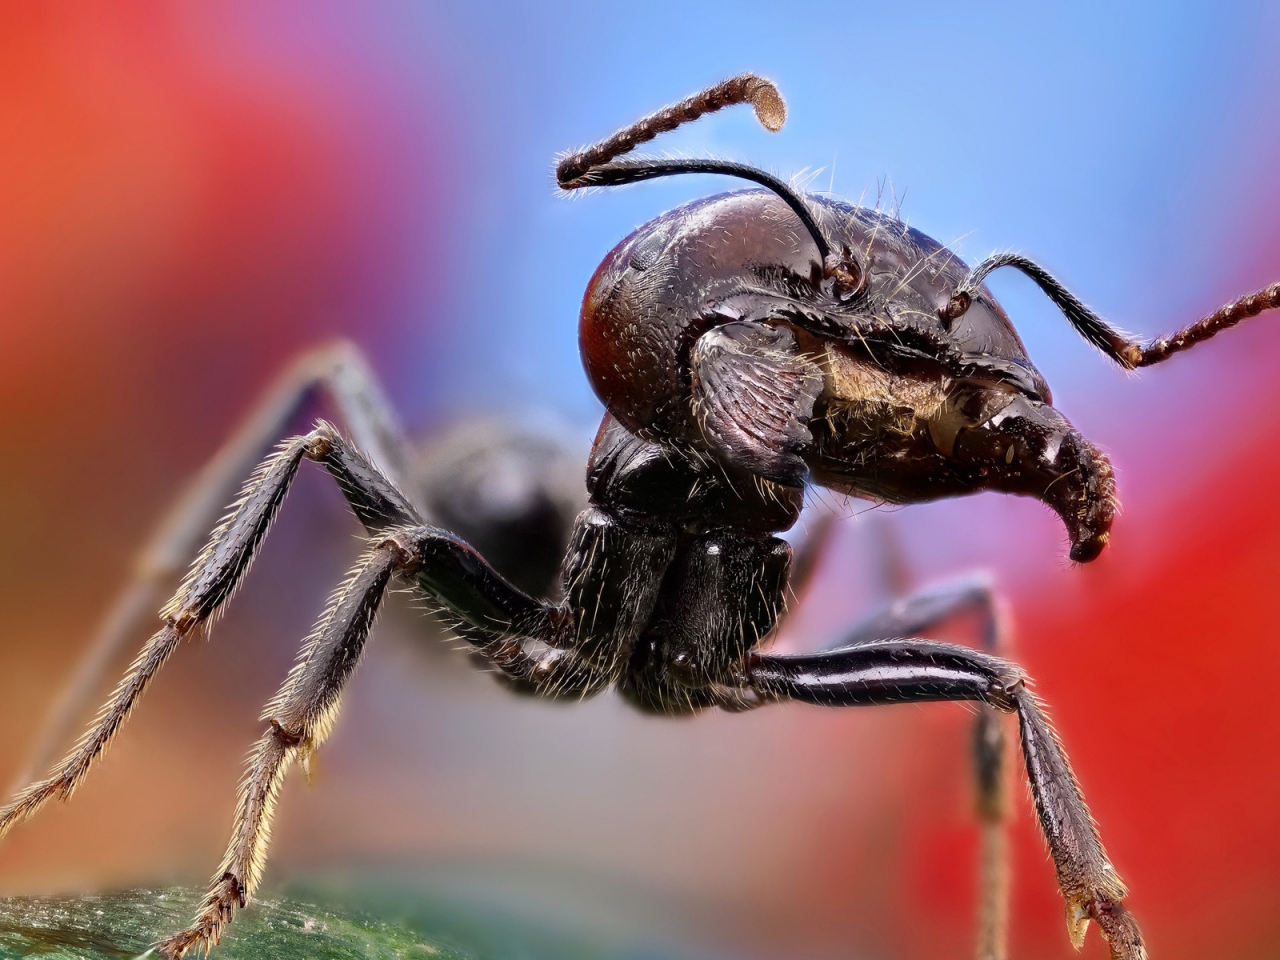 Ant Close Up for 1280 x 960 resolution